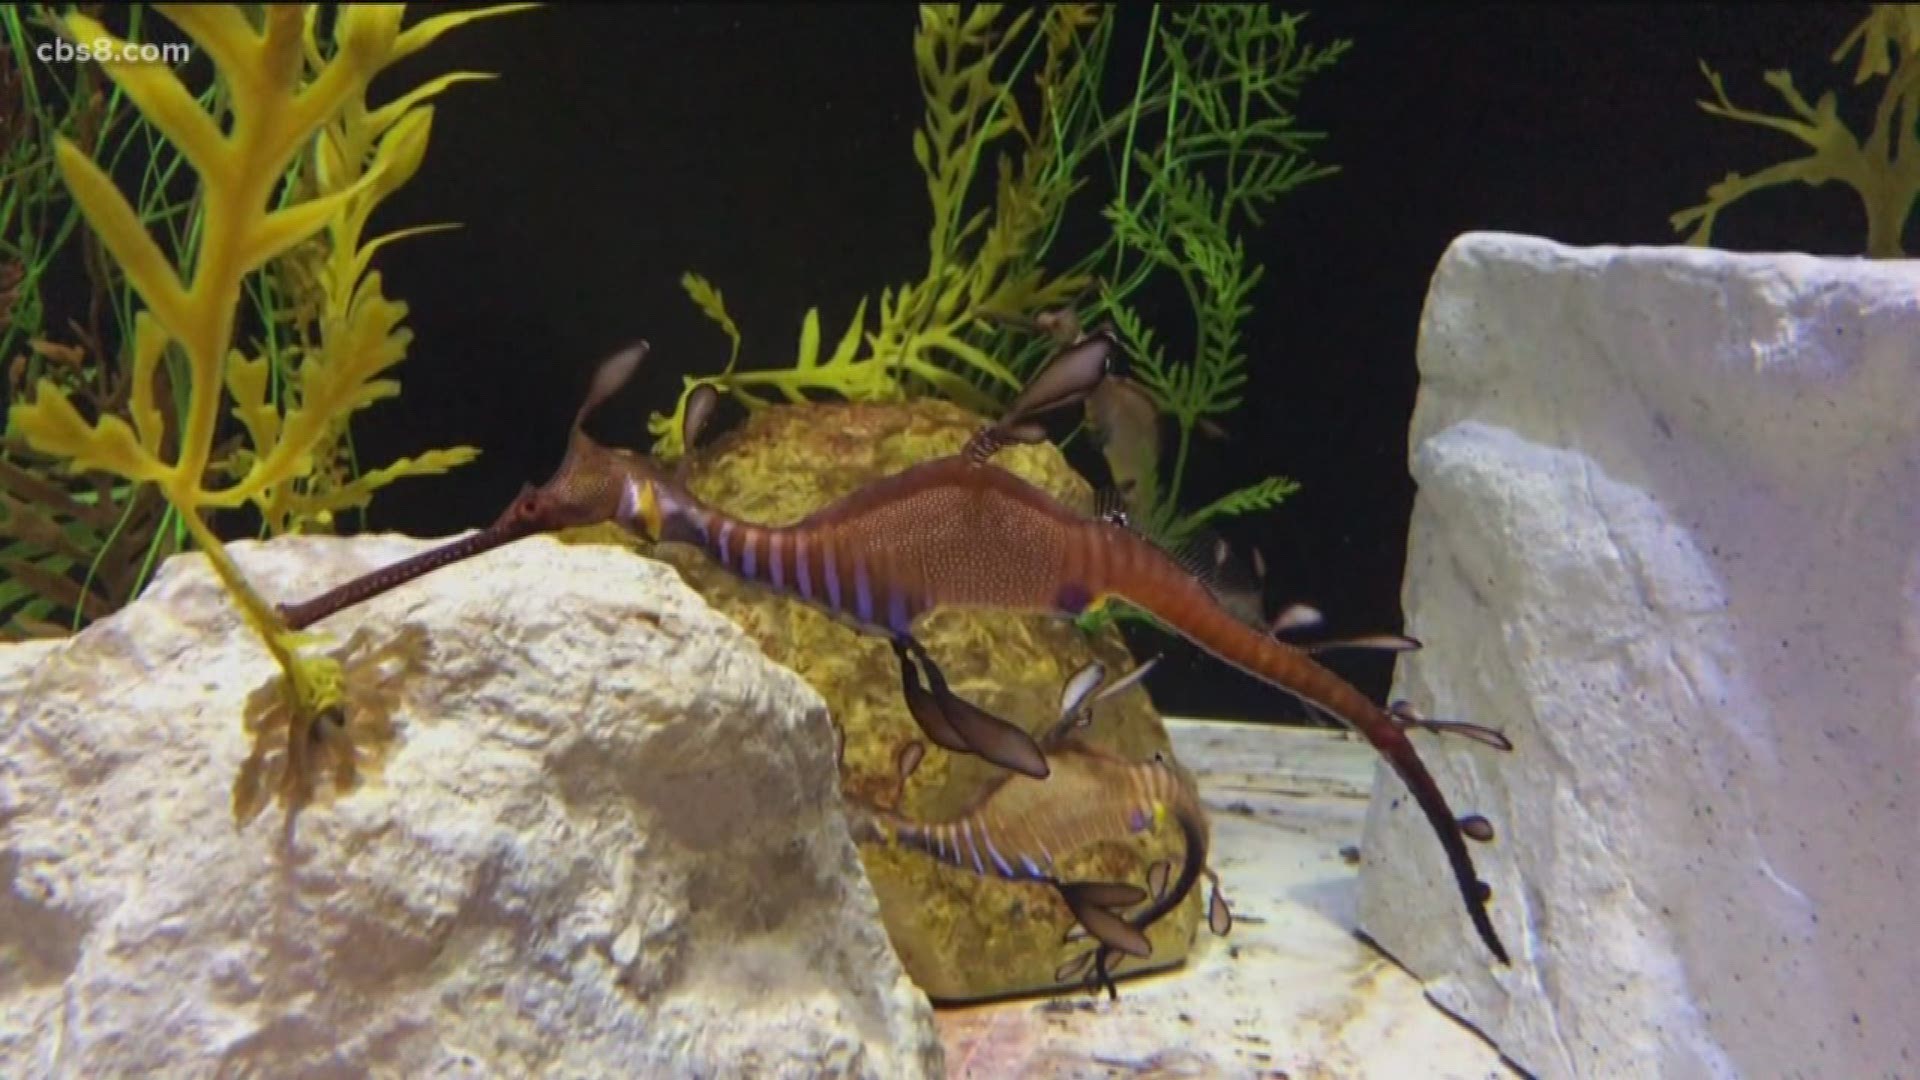 Two weedy sea dragons, which are extremely rare, just hatched, and they are just 3/4 of an inch long when the hatched.